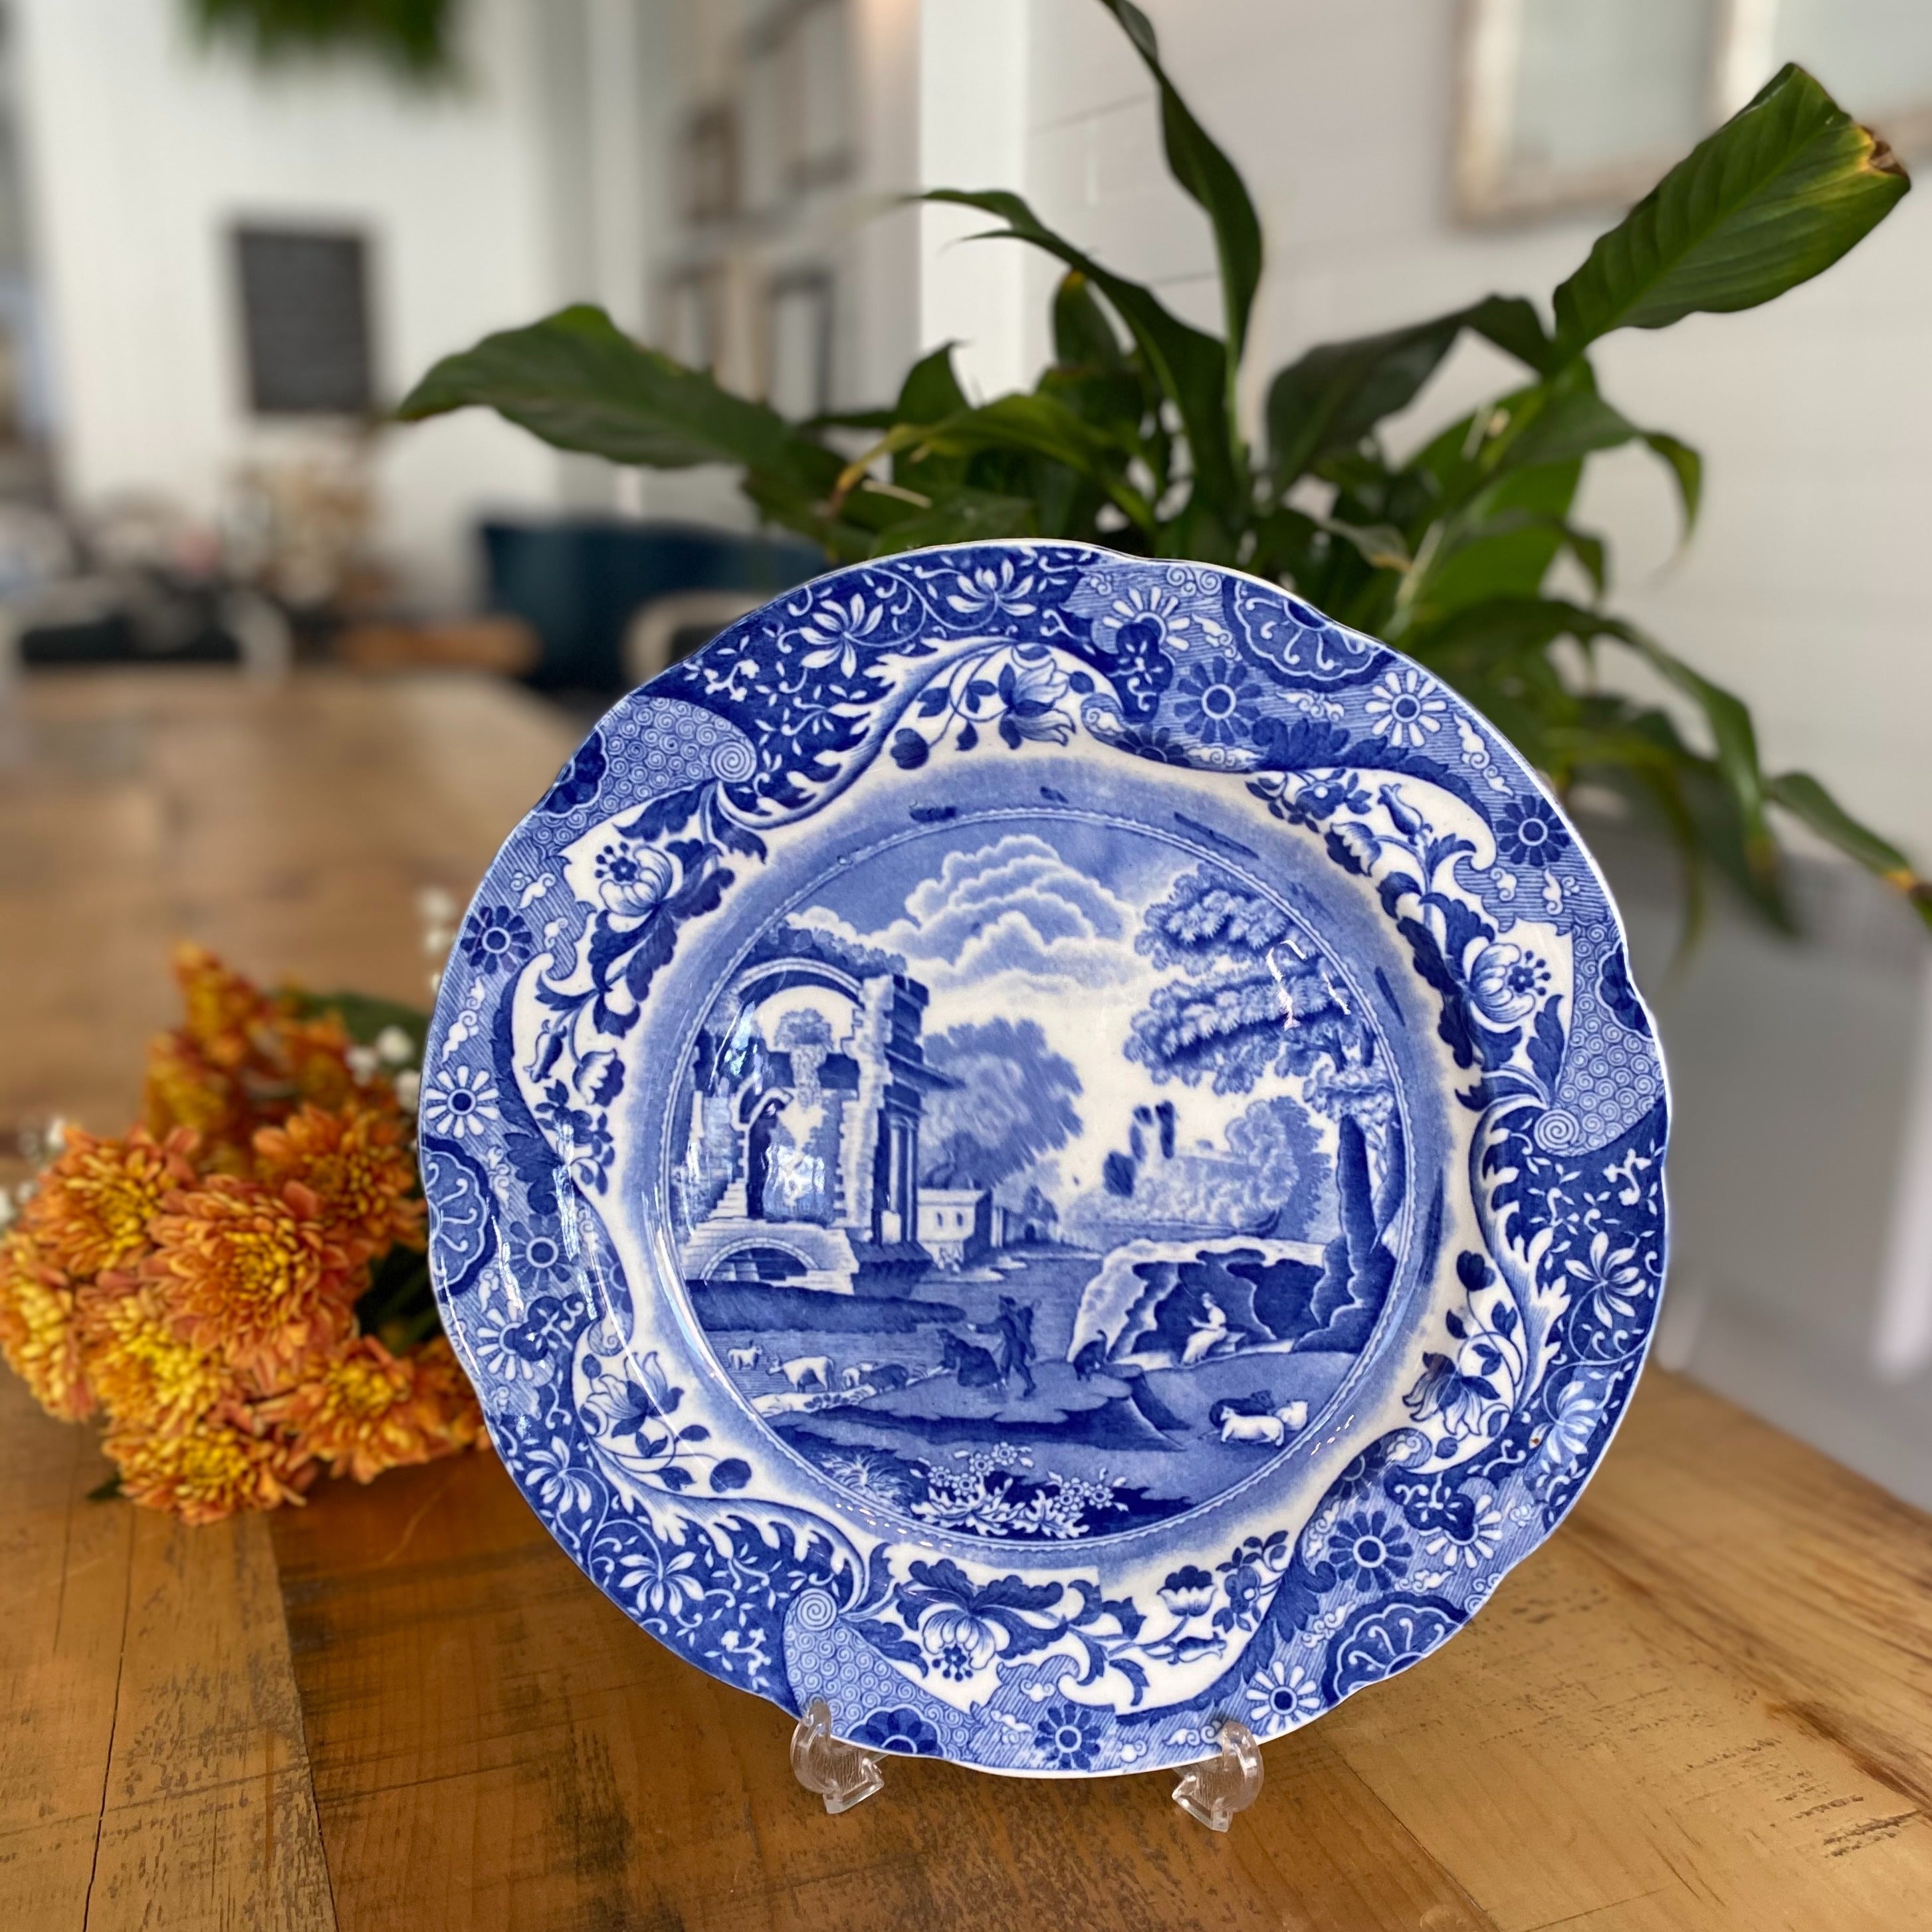 Spode Blue Italian: Perfection for 200 Years. 